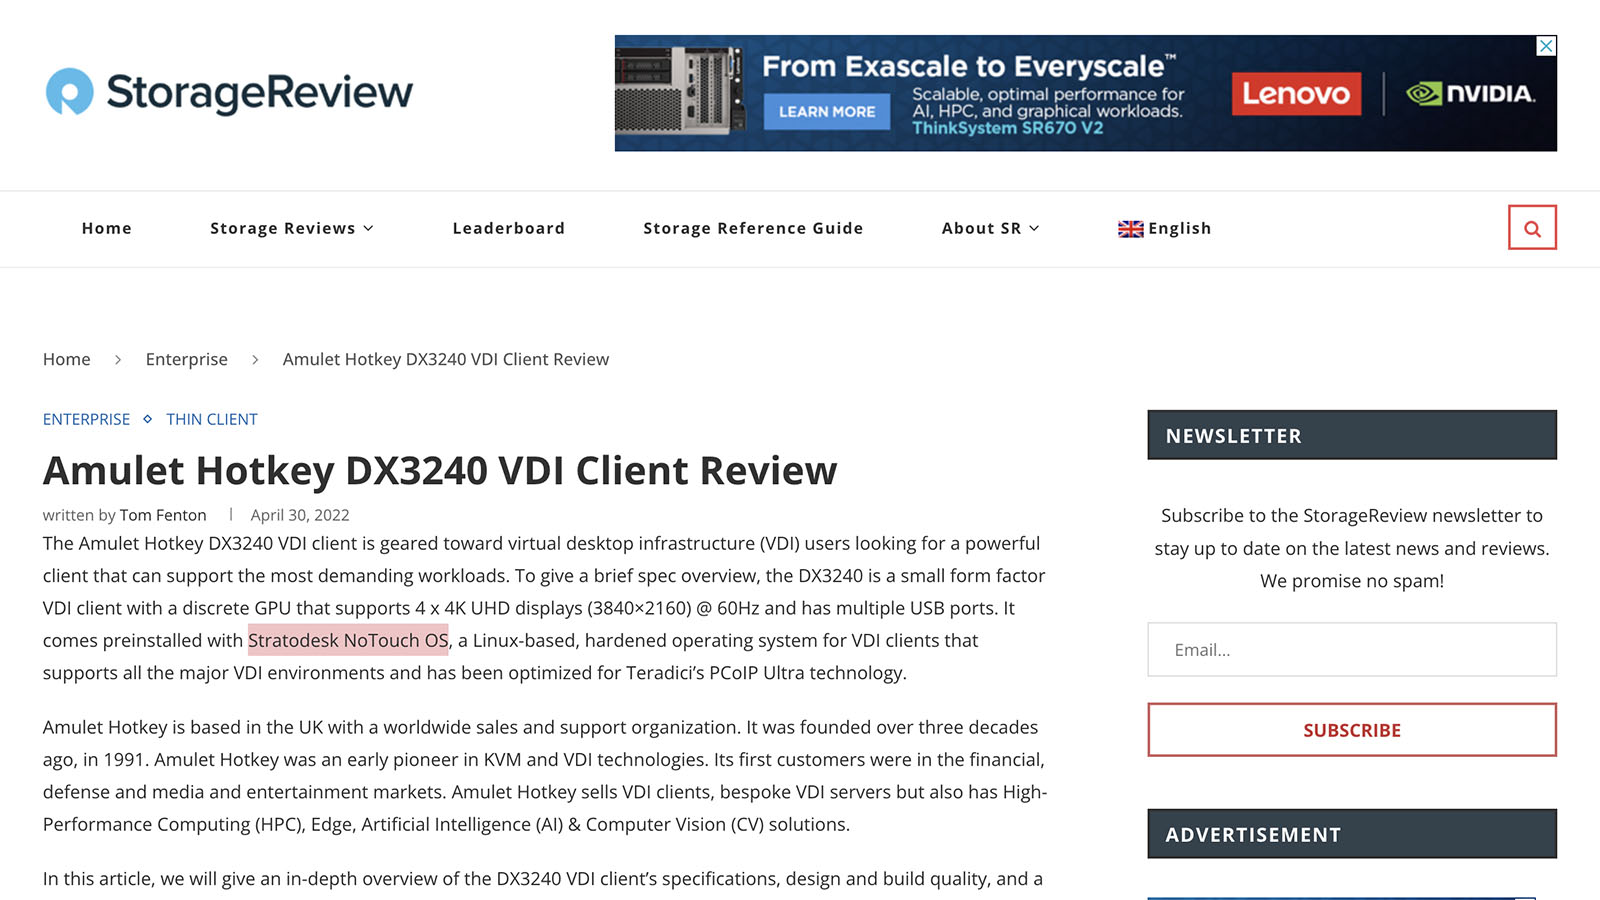 Amulet Hotkey DX3240 VDI Client Review with Stratodesk NoTouch OS